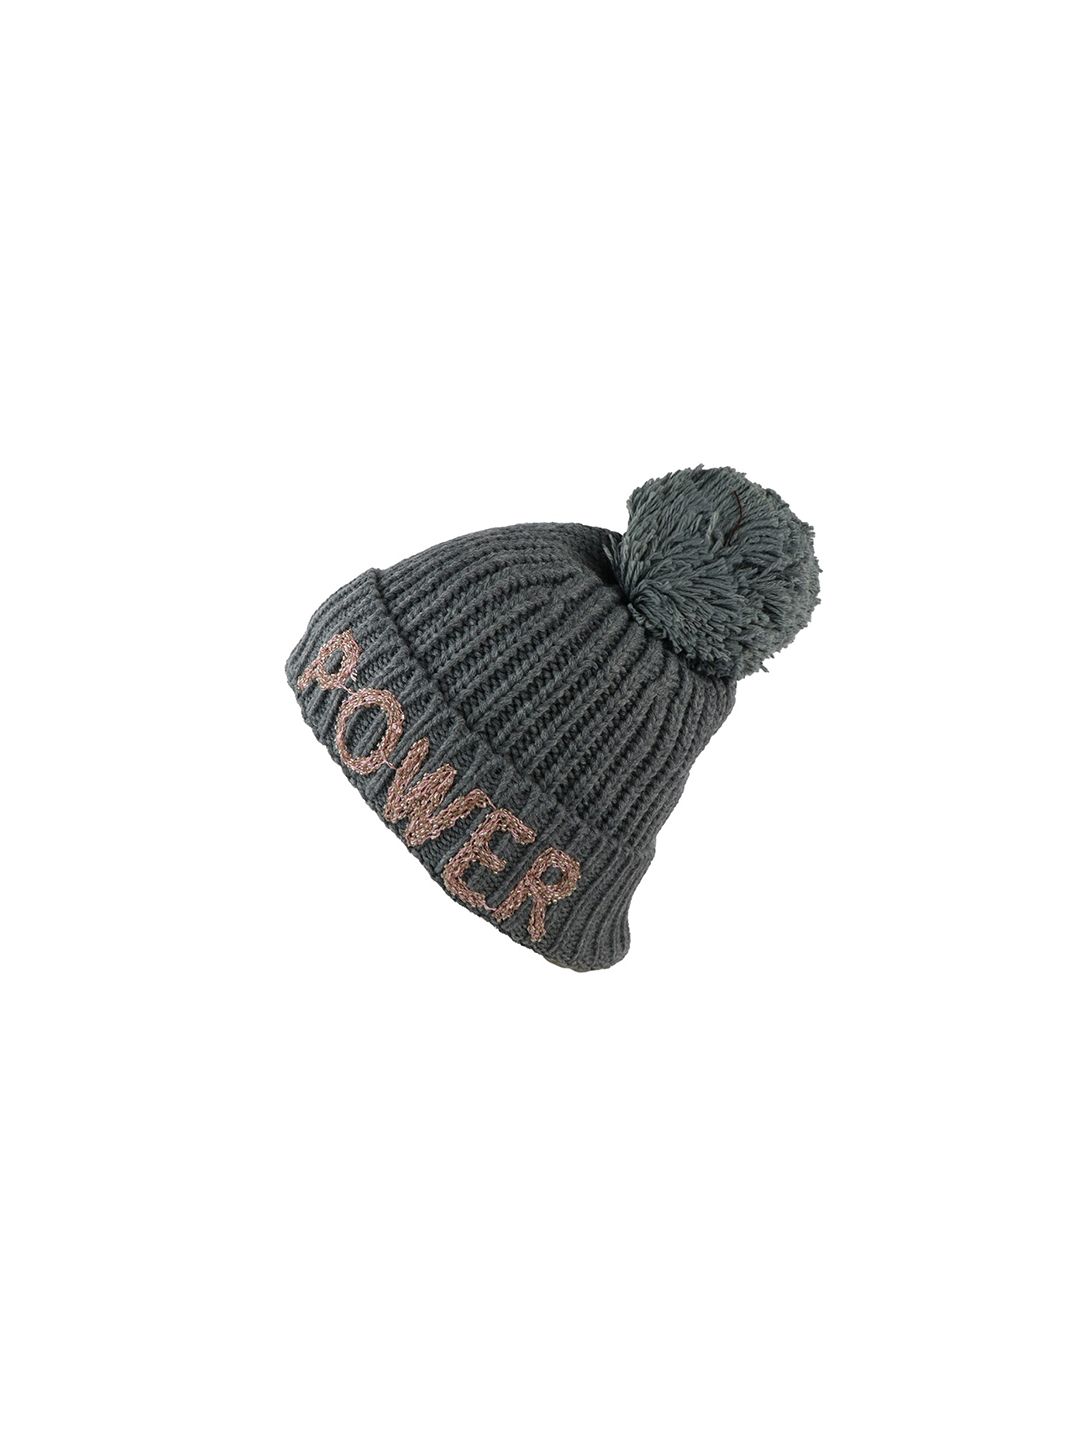 iSWEVEN Unisex Grey & Brown Woolen Beanie Price in India